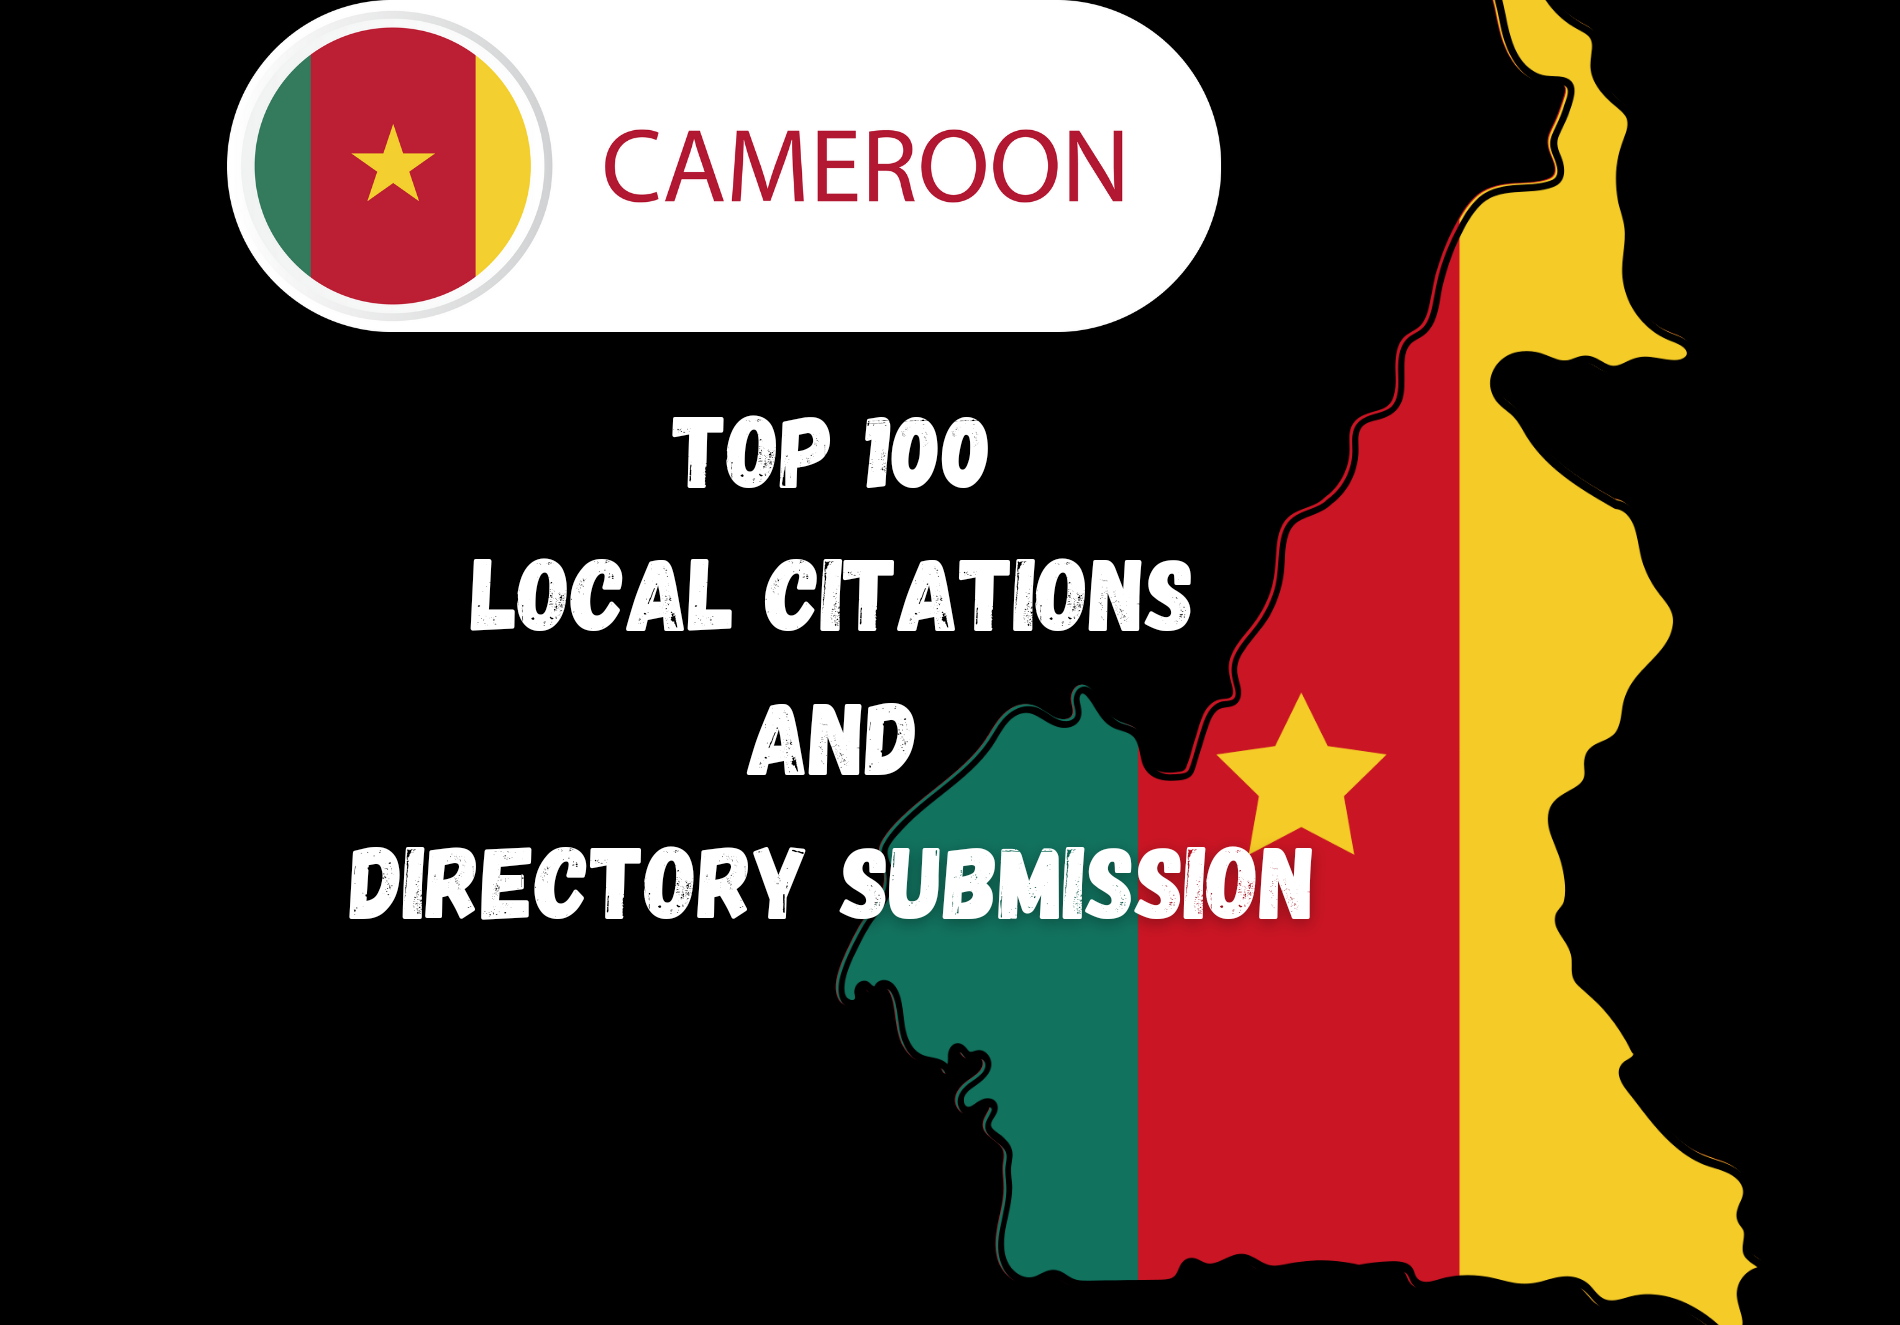 Top 100 cameroon Local citations and directory submission 